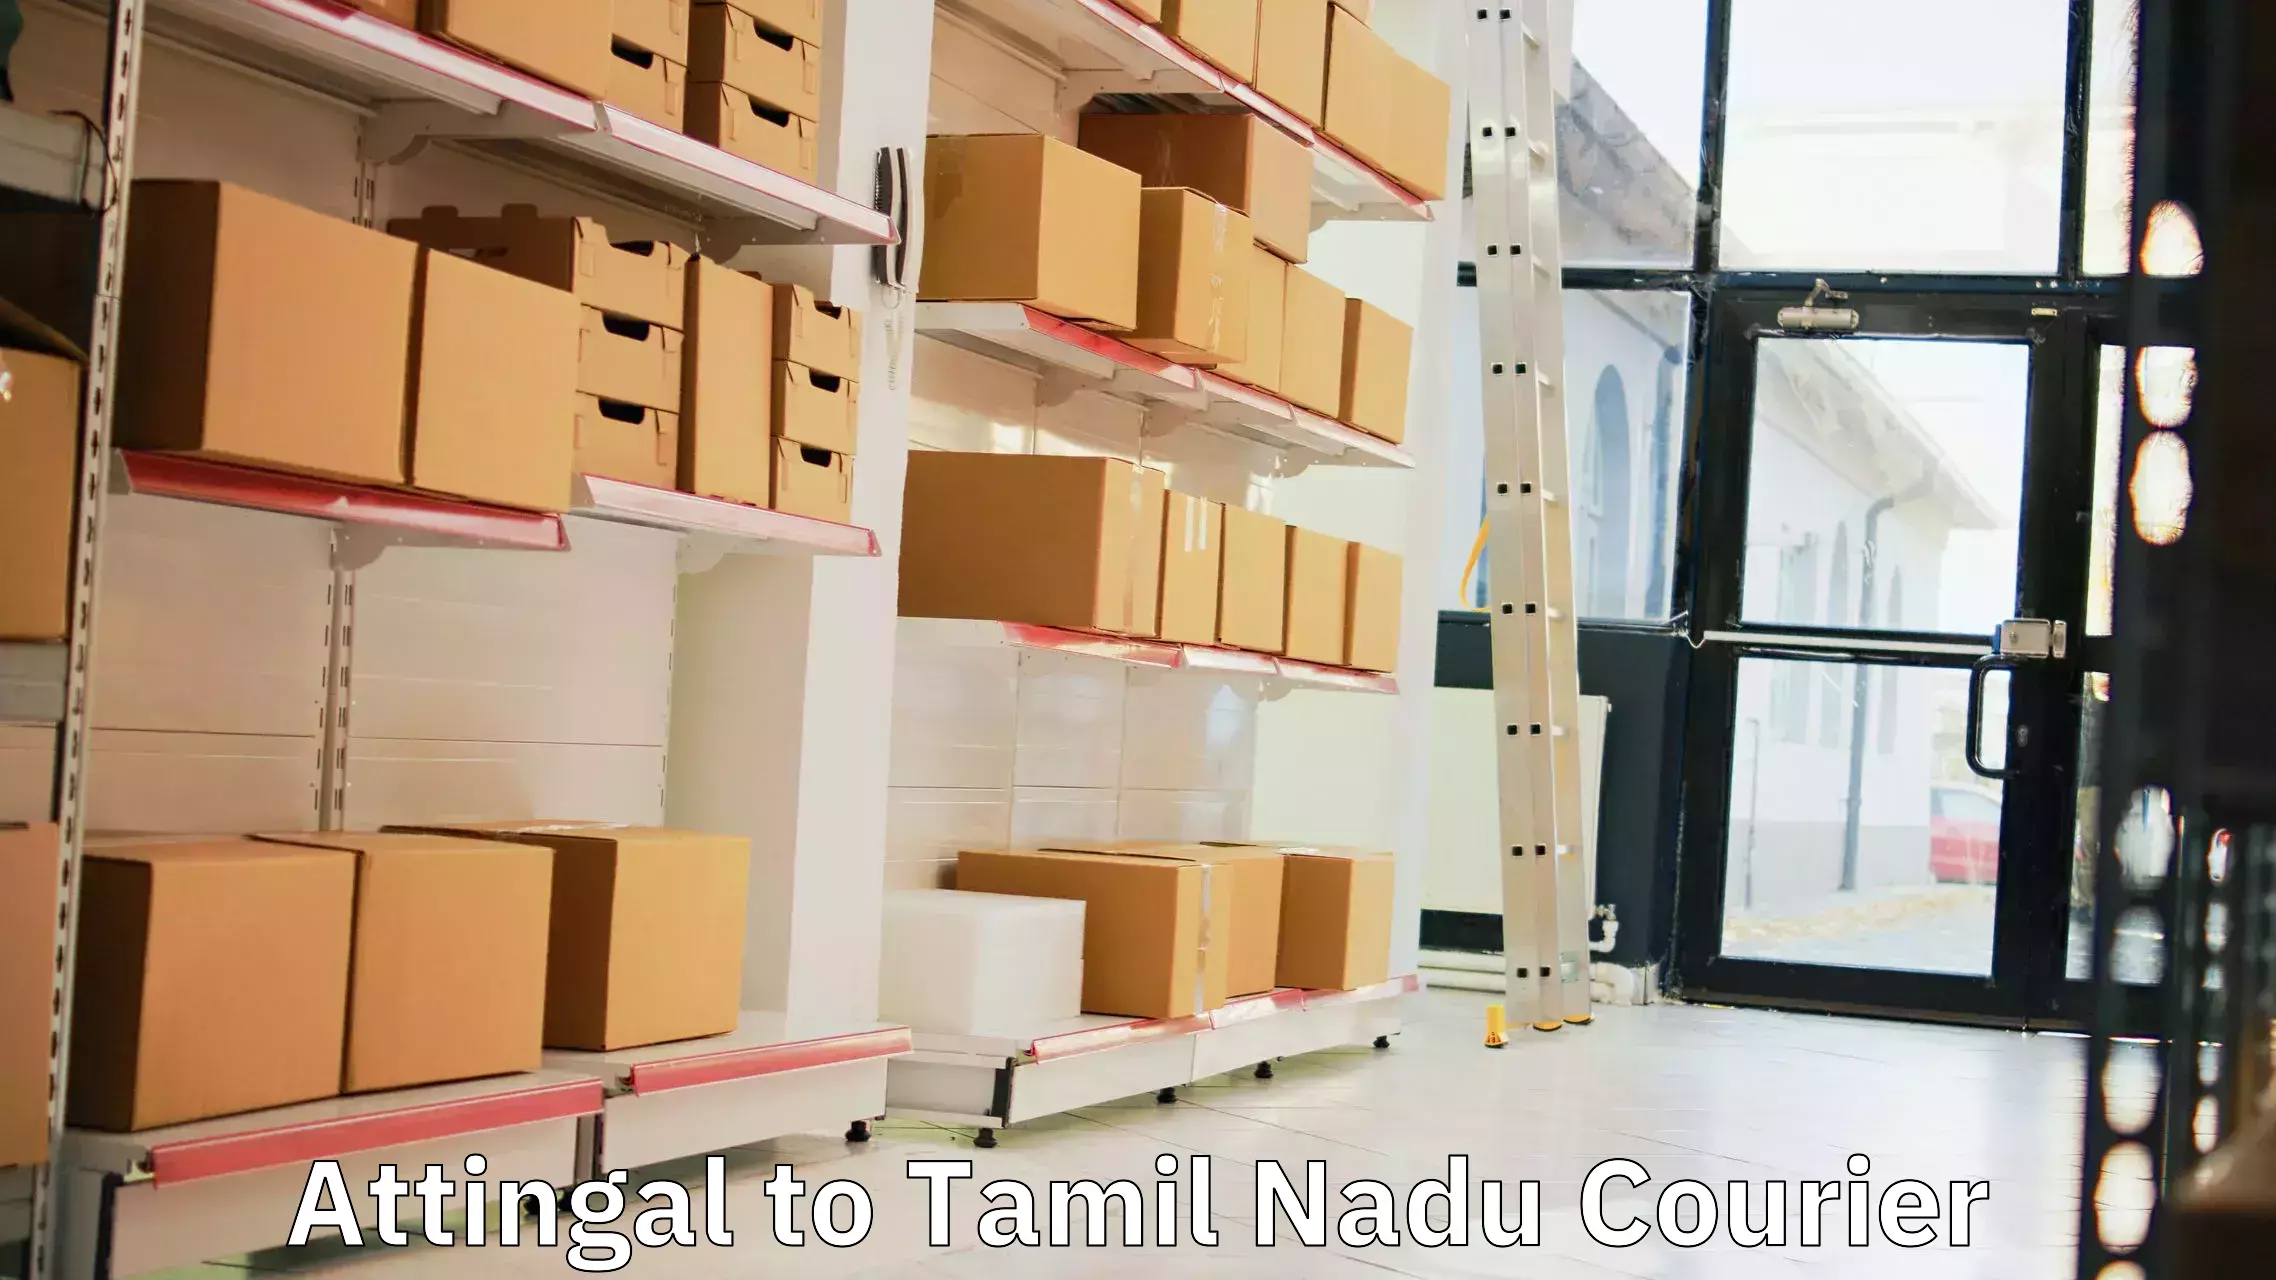 Small business couriers Attingal to Tamil Nadu